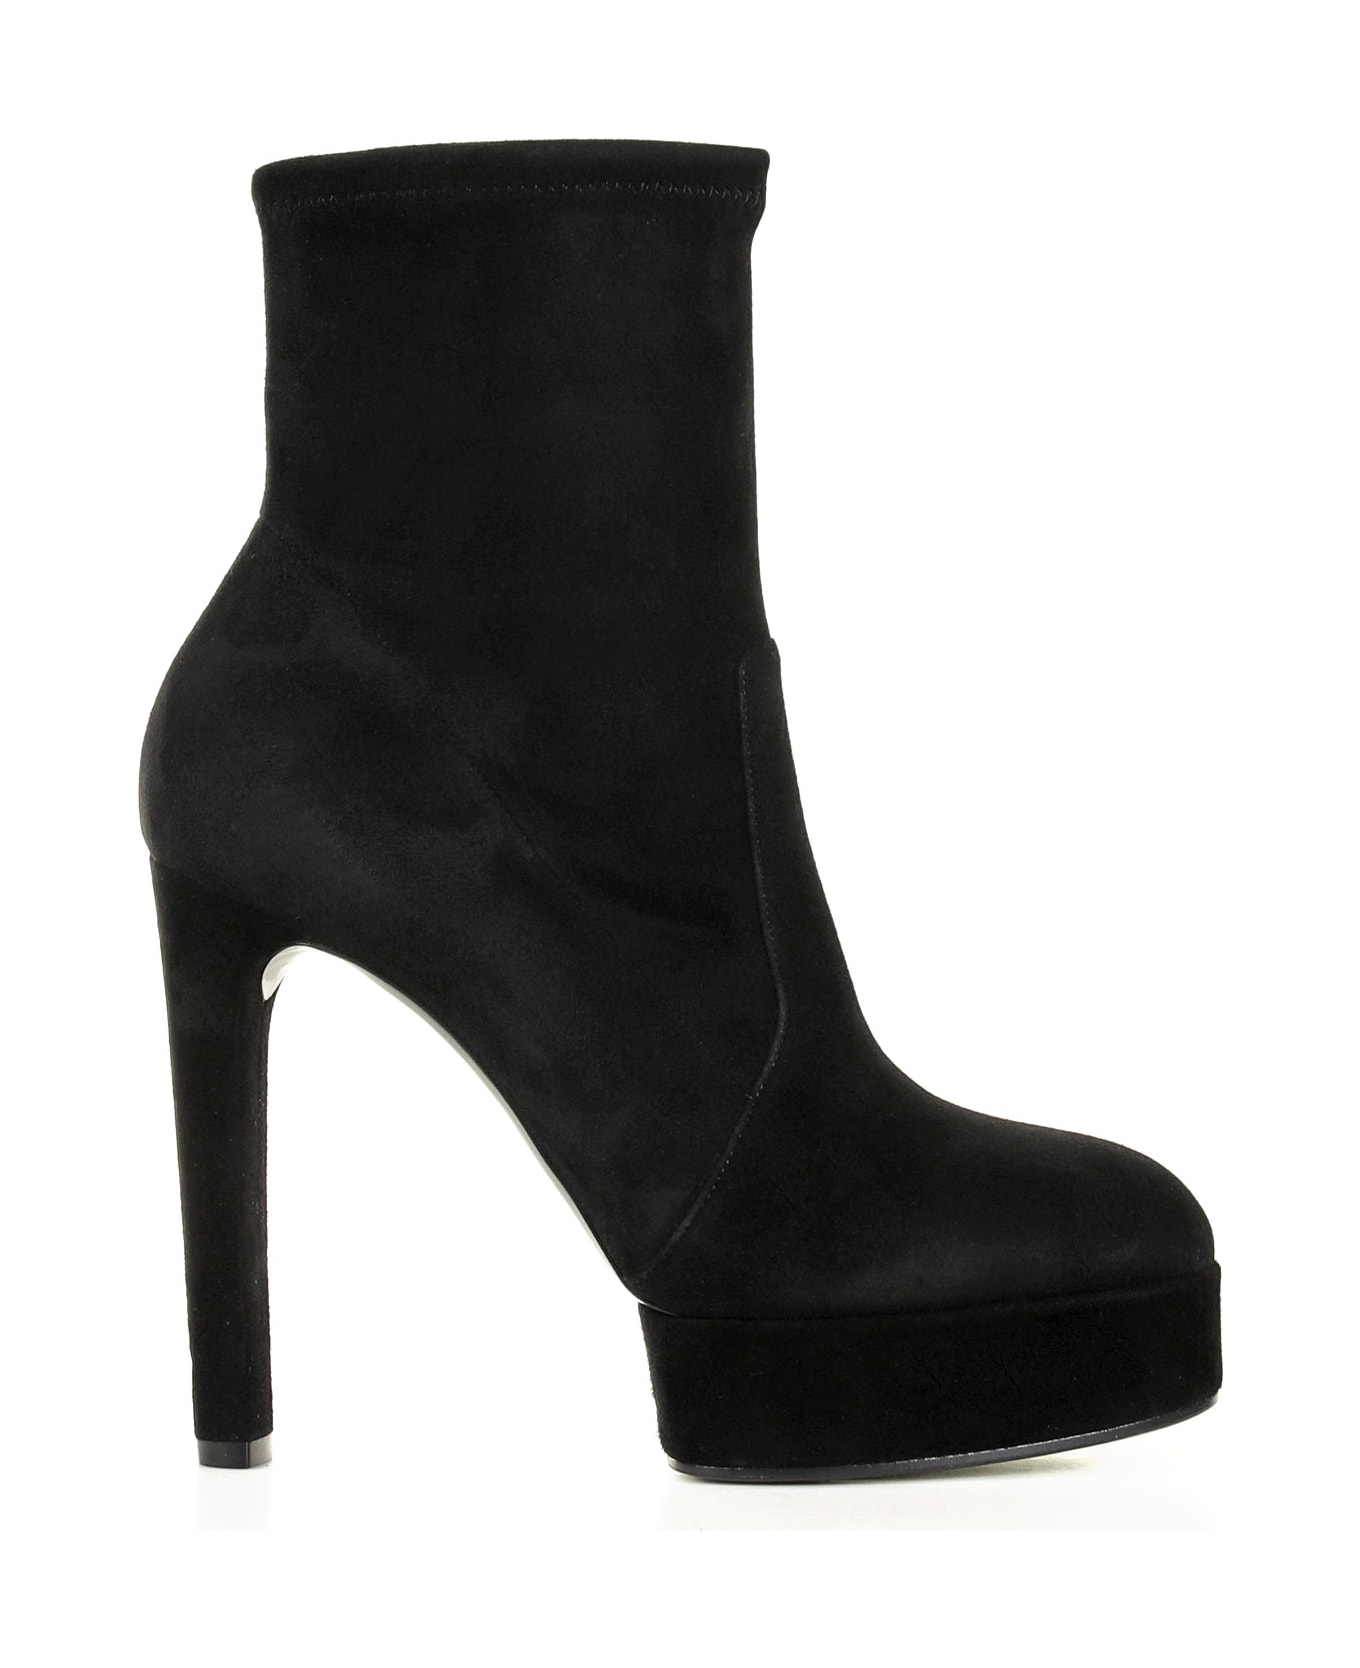 Casadei Suede Ankle Boot - NERO